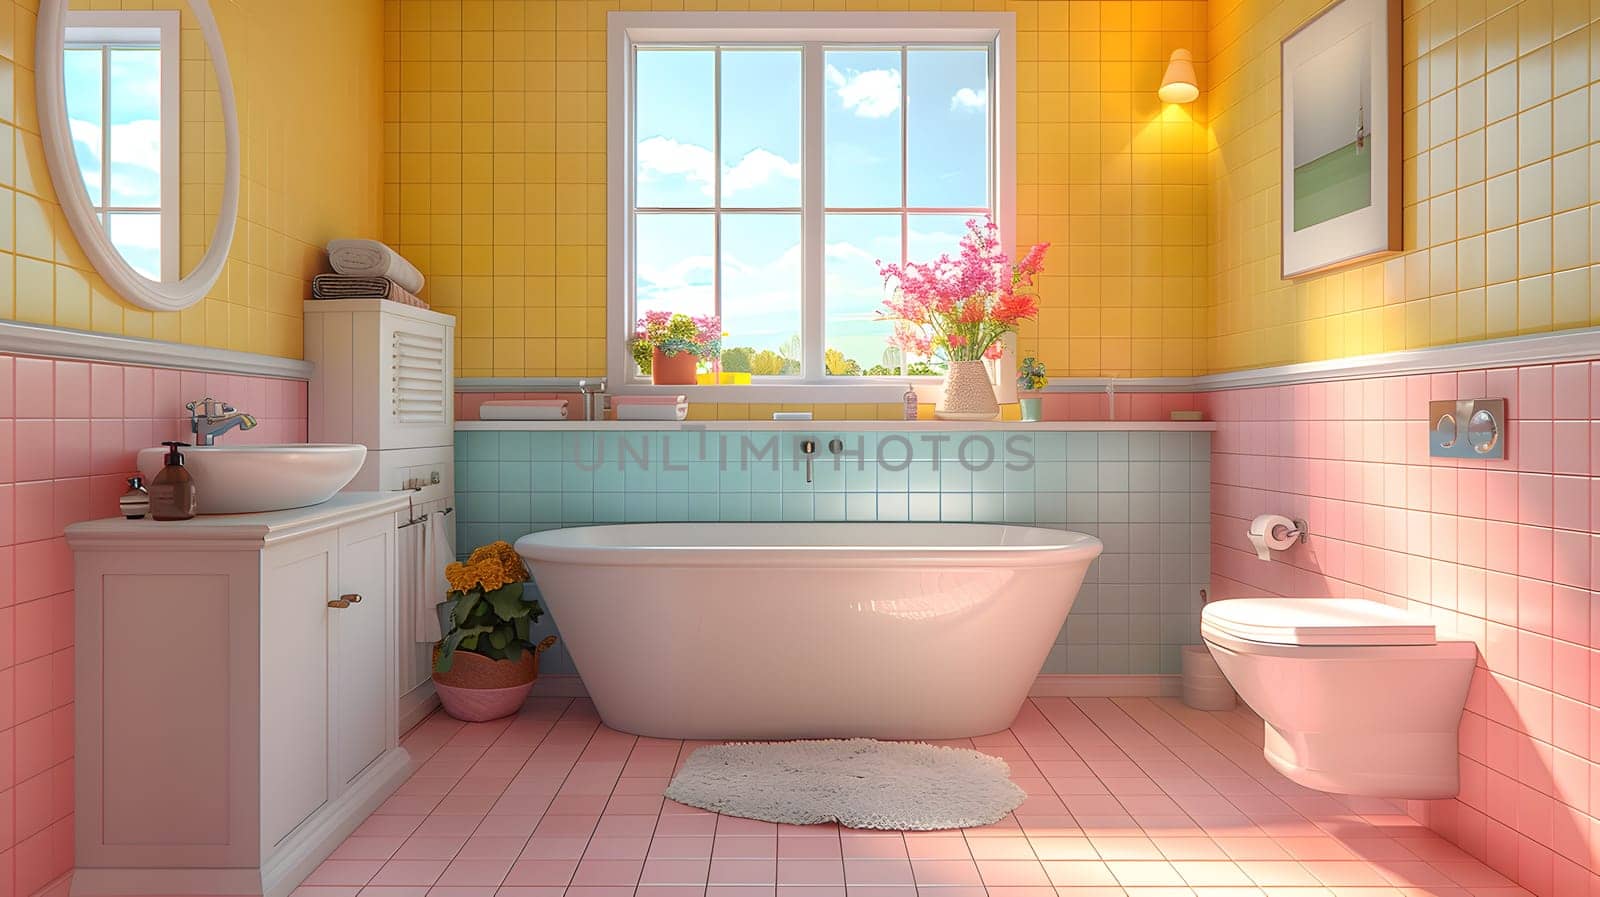 A bathroom with pink tiles, yellow walls, a tub, a sink, and a toilet. The window lets in natural light, complementing the azure and purple accents in the interior design